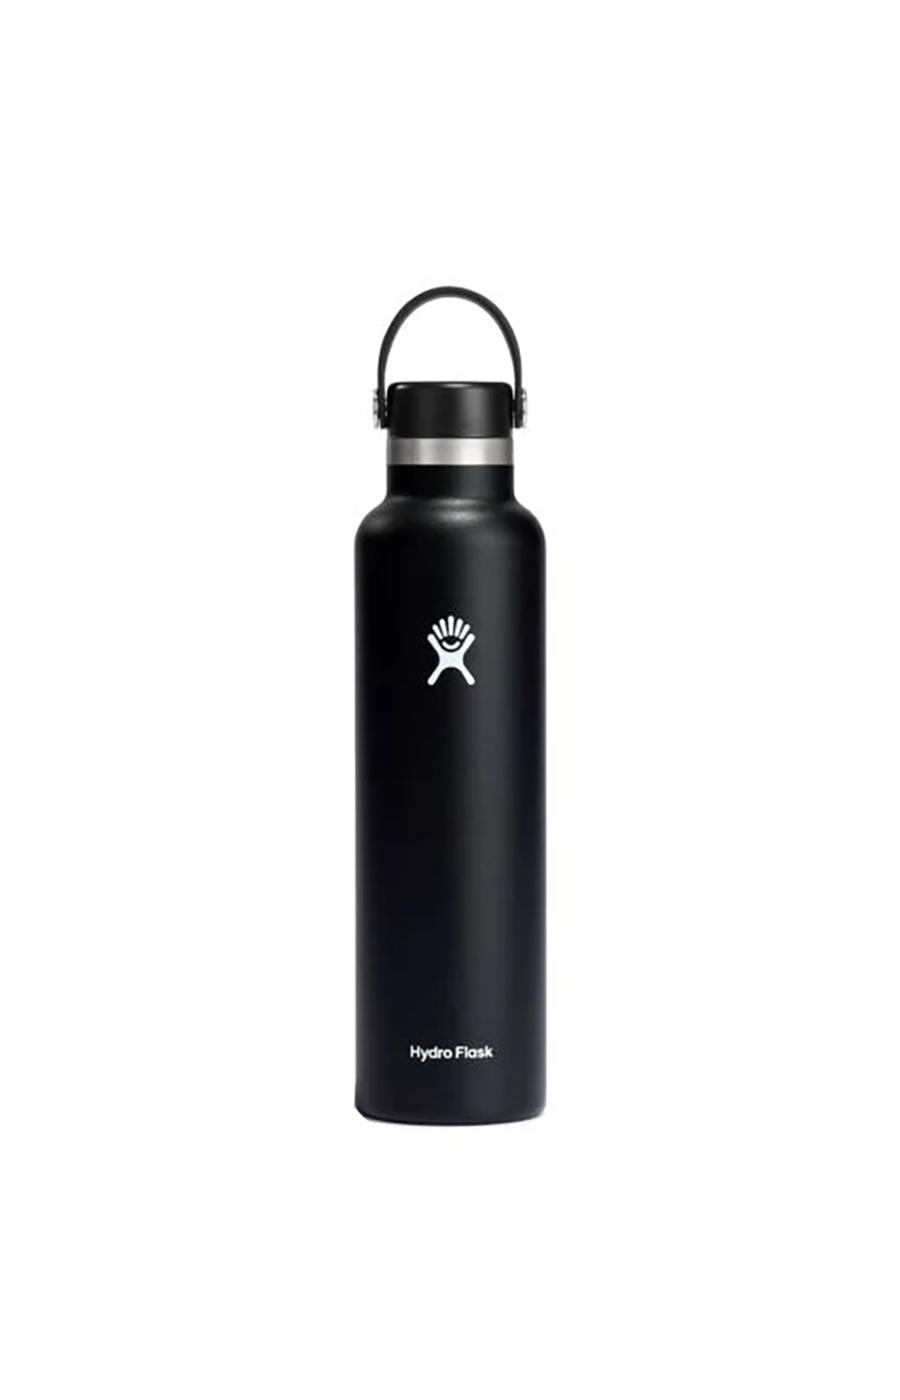 Hydro Flask Standard Mouth Water Bottle with Flex Cap - Black; image 1 of 3